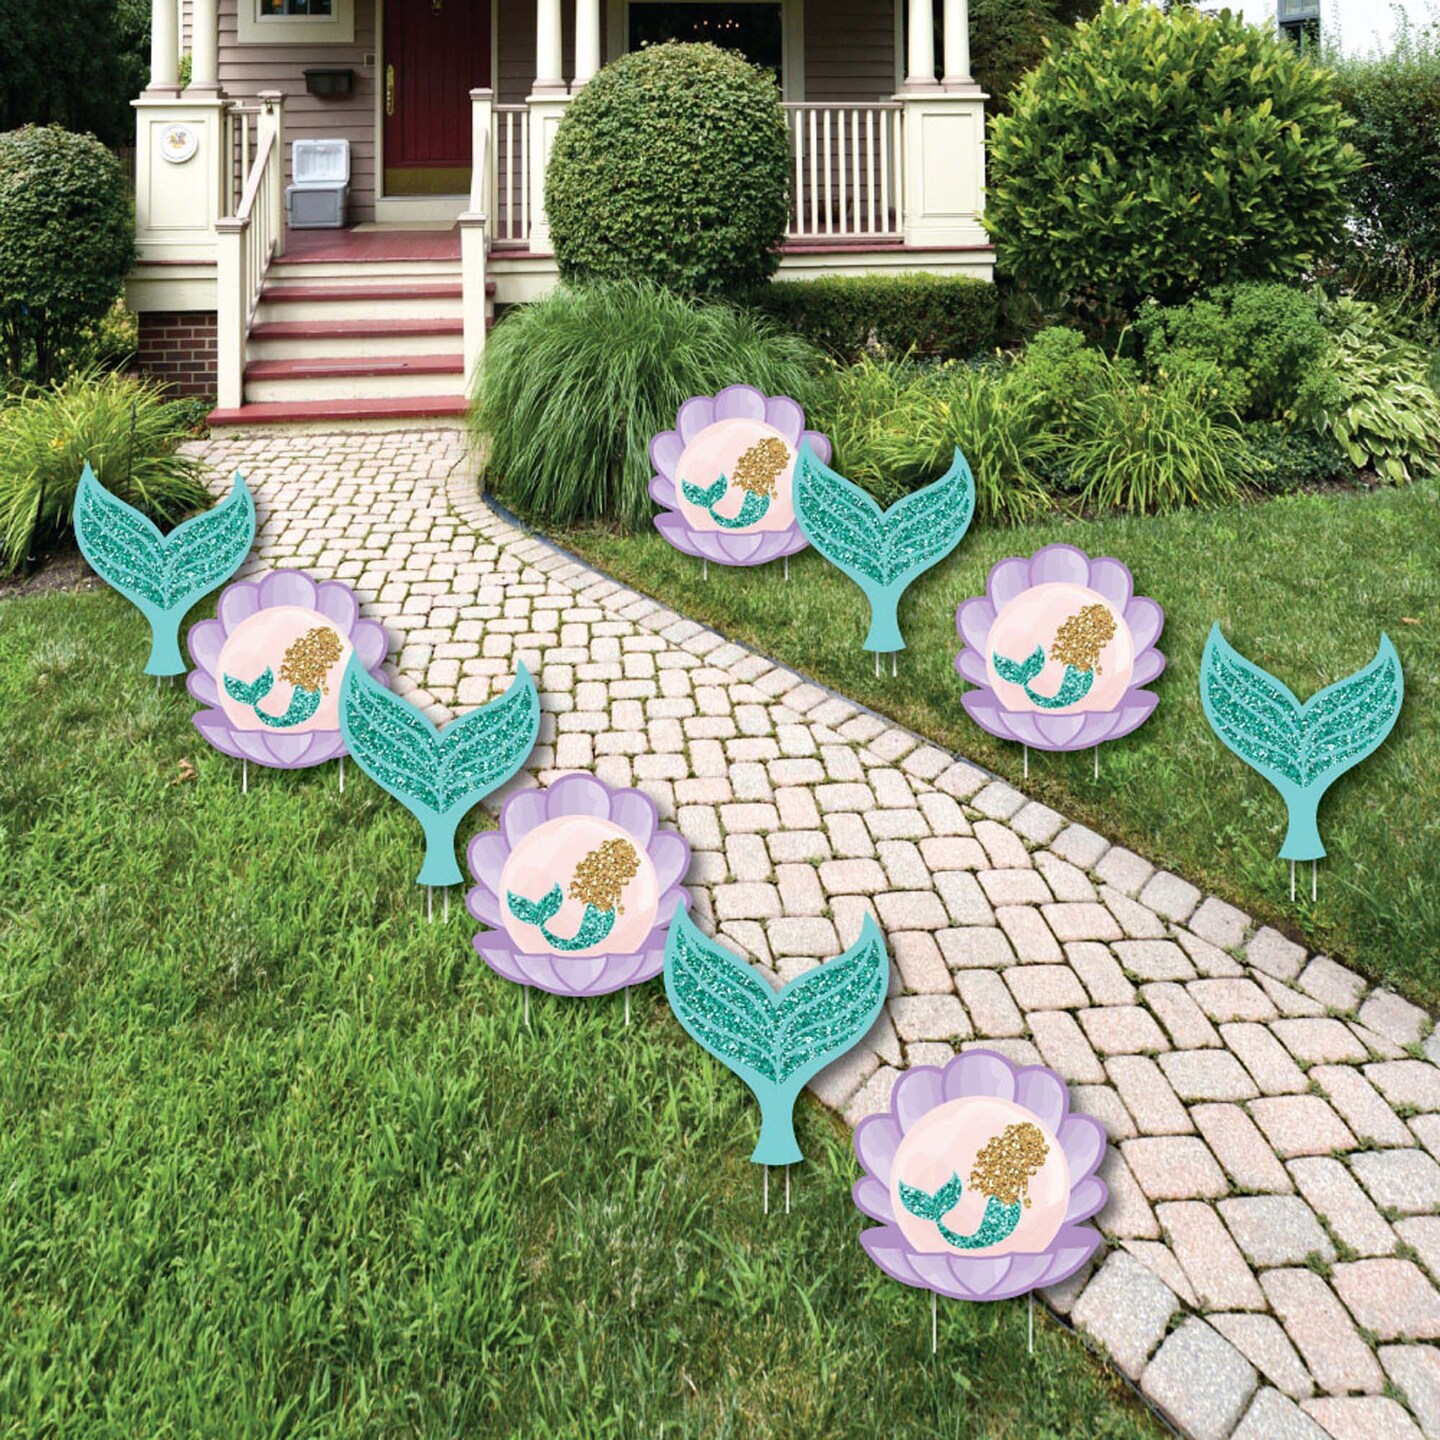 Big Dot of Happiness Let&#x27;s Be Mermaids - Mermaid &#x26; Seashell Lawn Decorations - Outdoor Baby Shower or Birthday Party Yard Decorations - 10 Piece